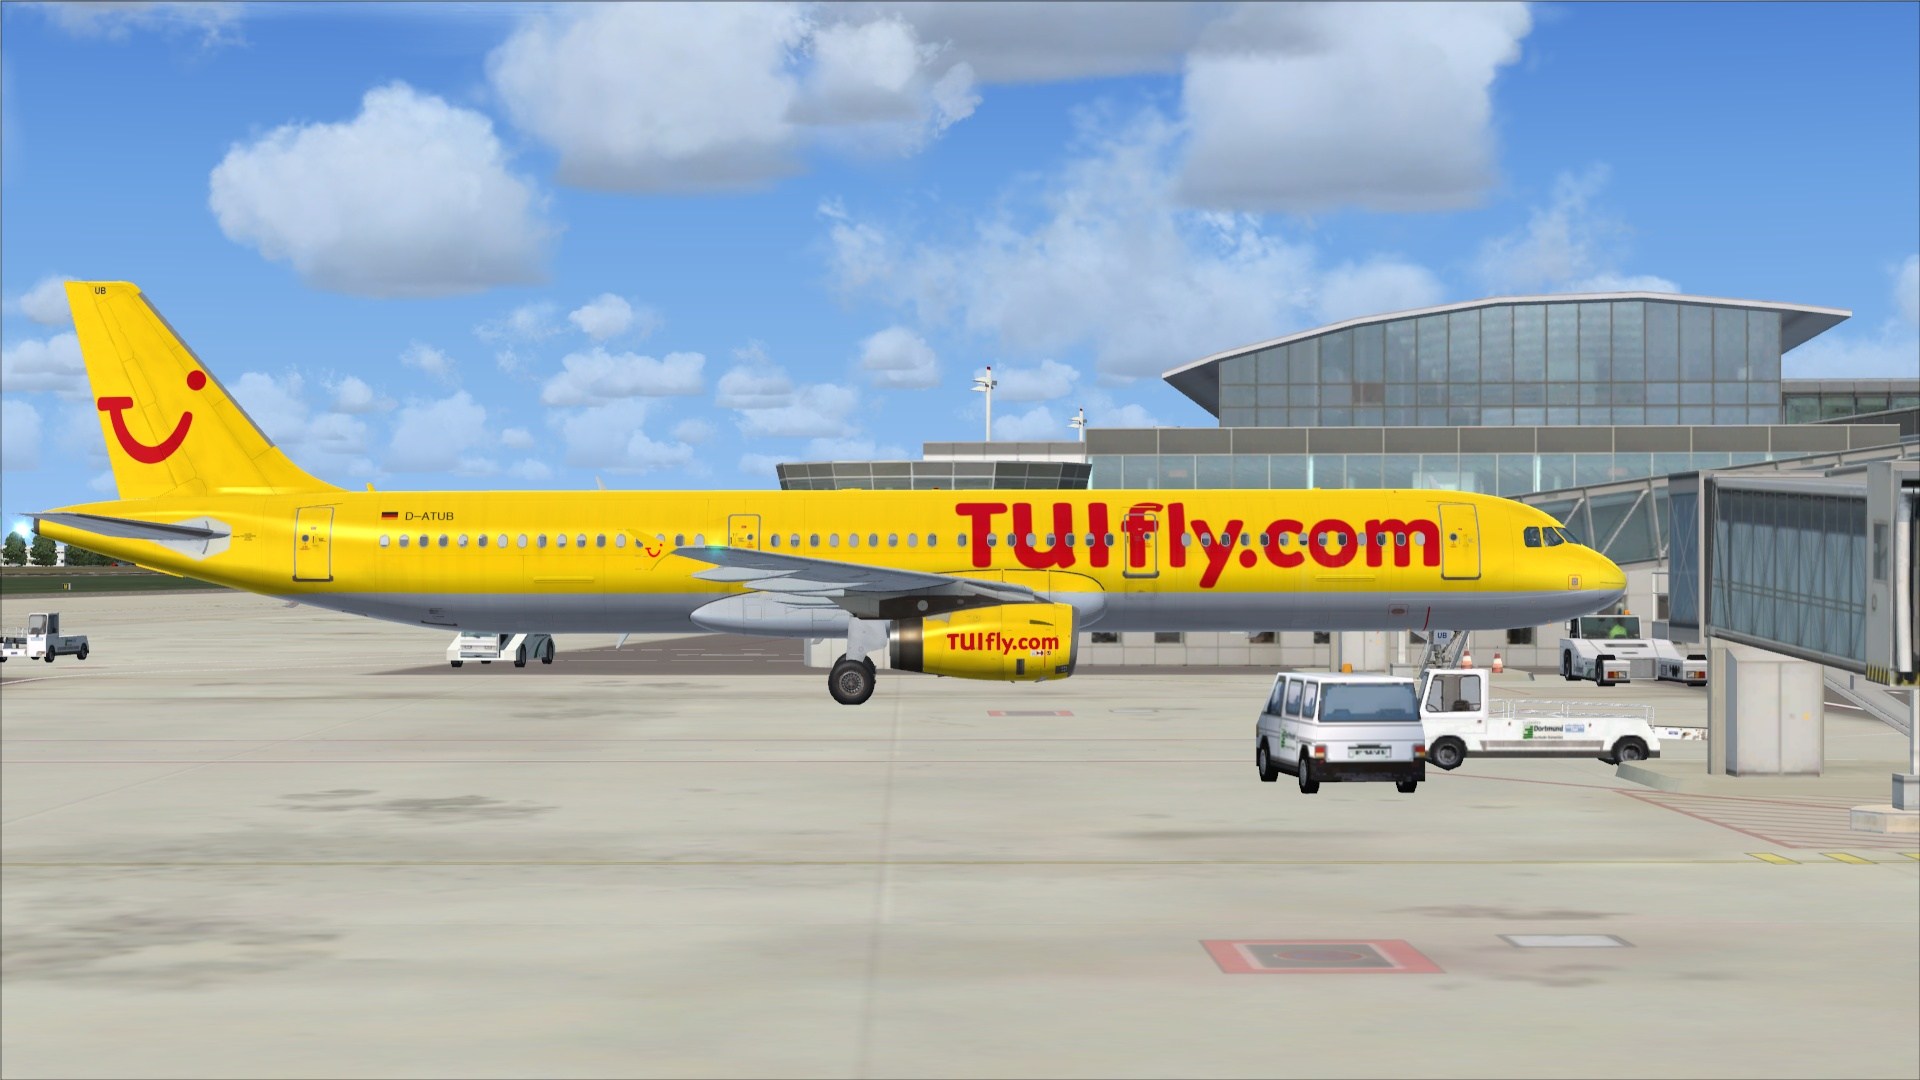 More information about "TUI family package N.3 A321"